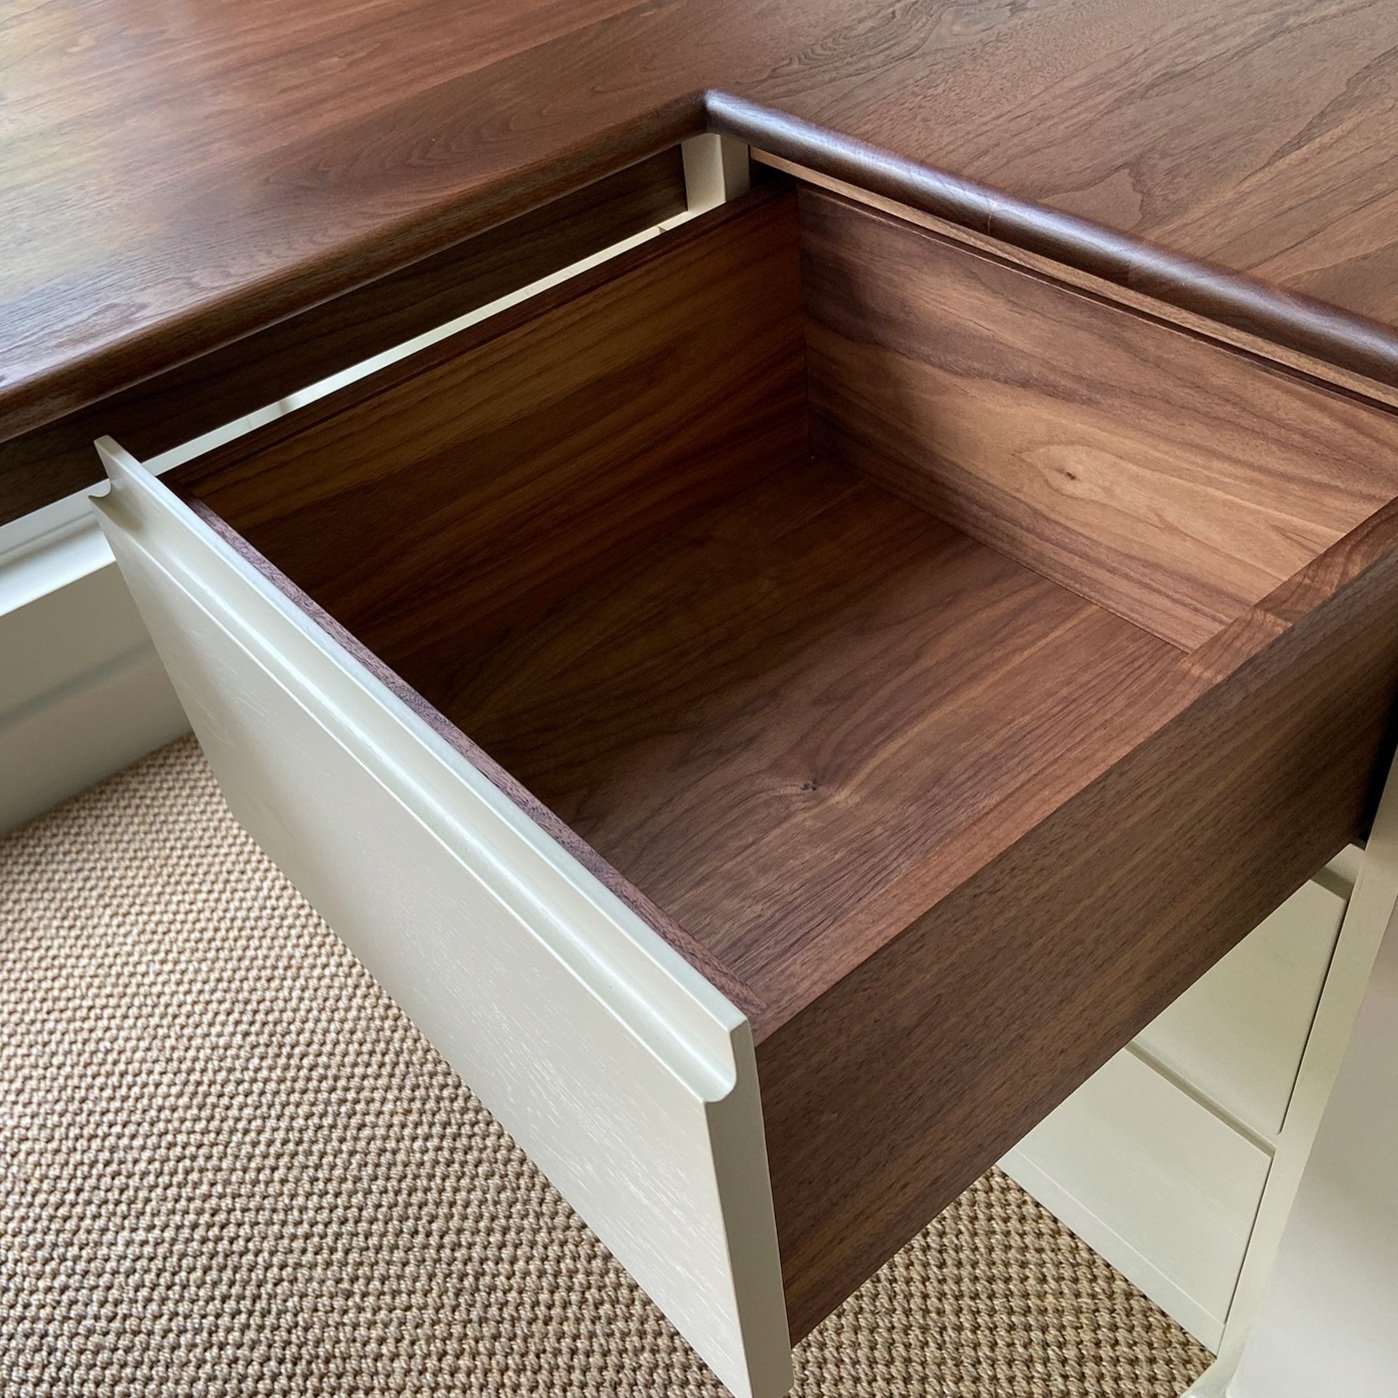 Drawer box made from walnut wood with a white painted front. The drawer is open and extending out from under a solid walnut desk. 